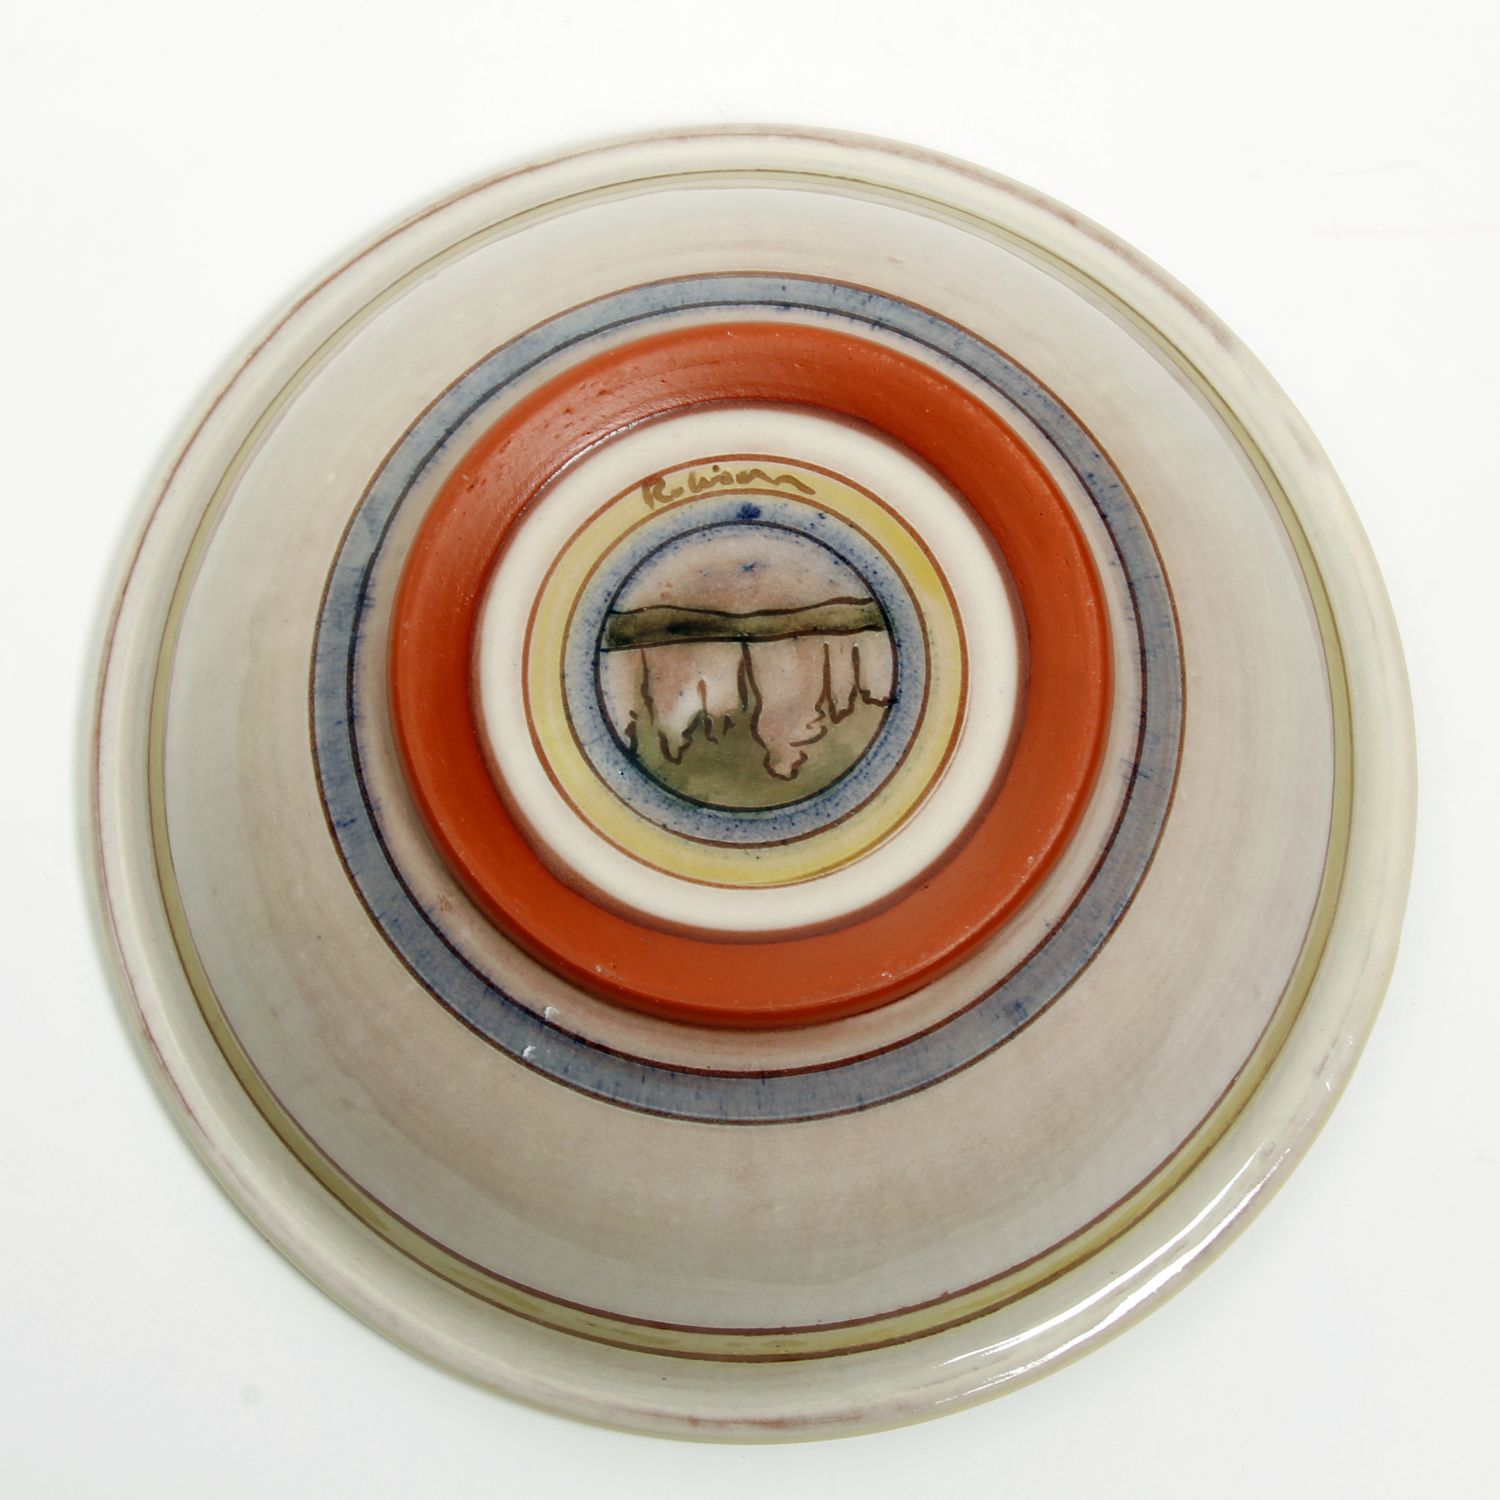 Sean Robinson: Painted Bowl in Green Product Image 3 of 3